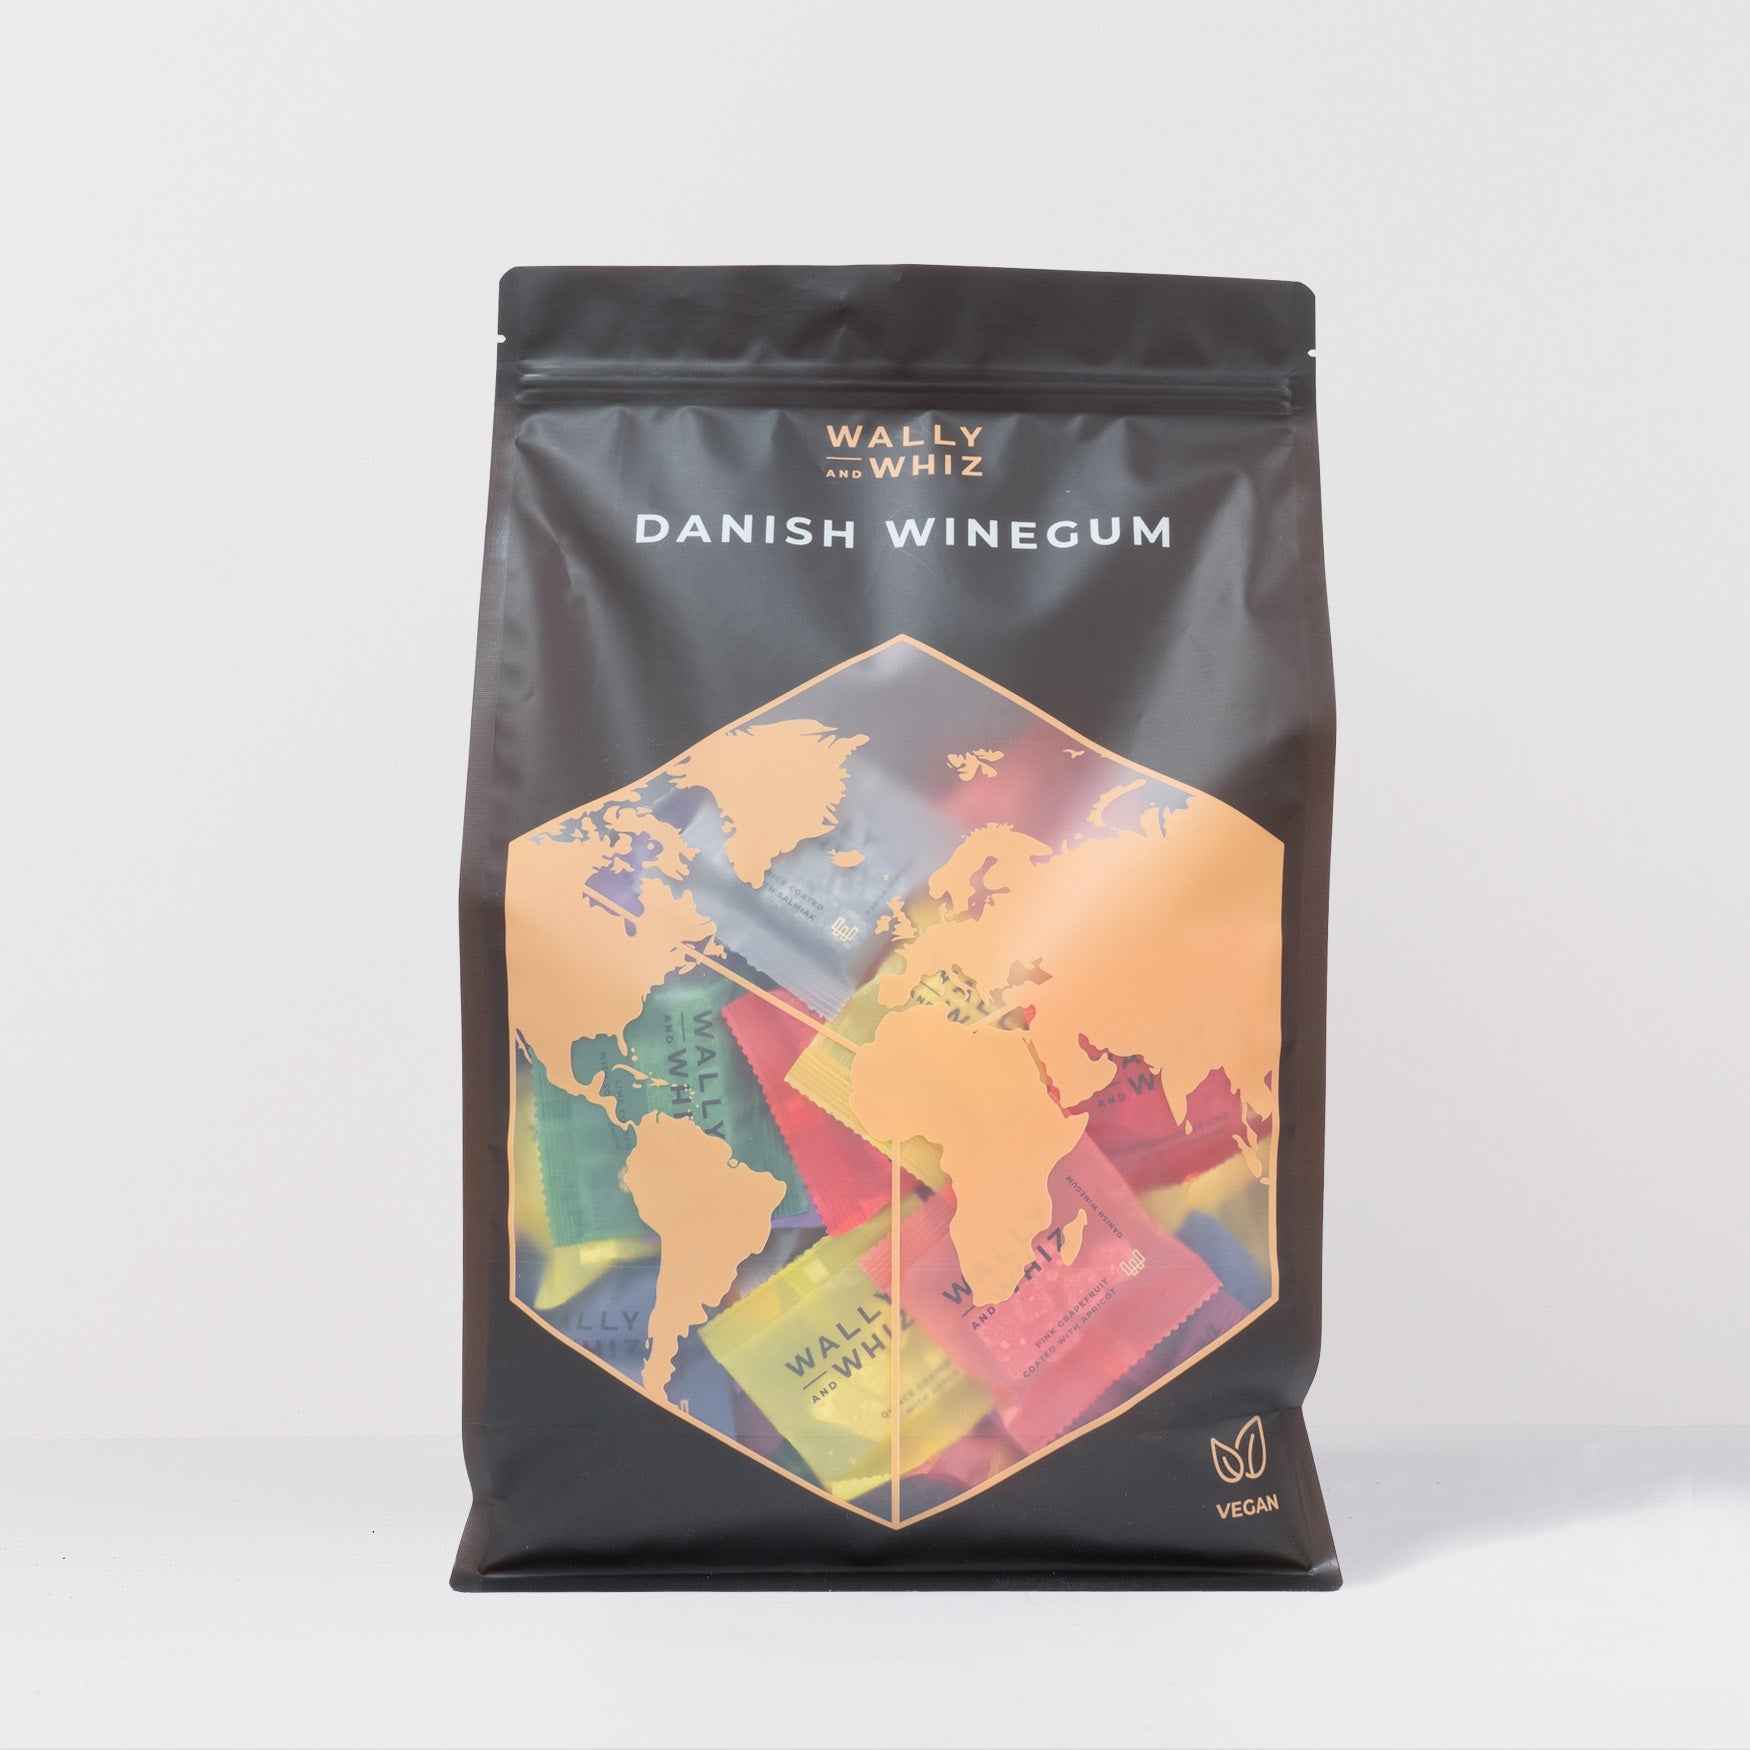 Wally and Whiz mix - 125 bags, 1.375g